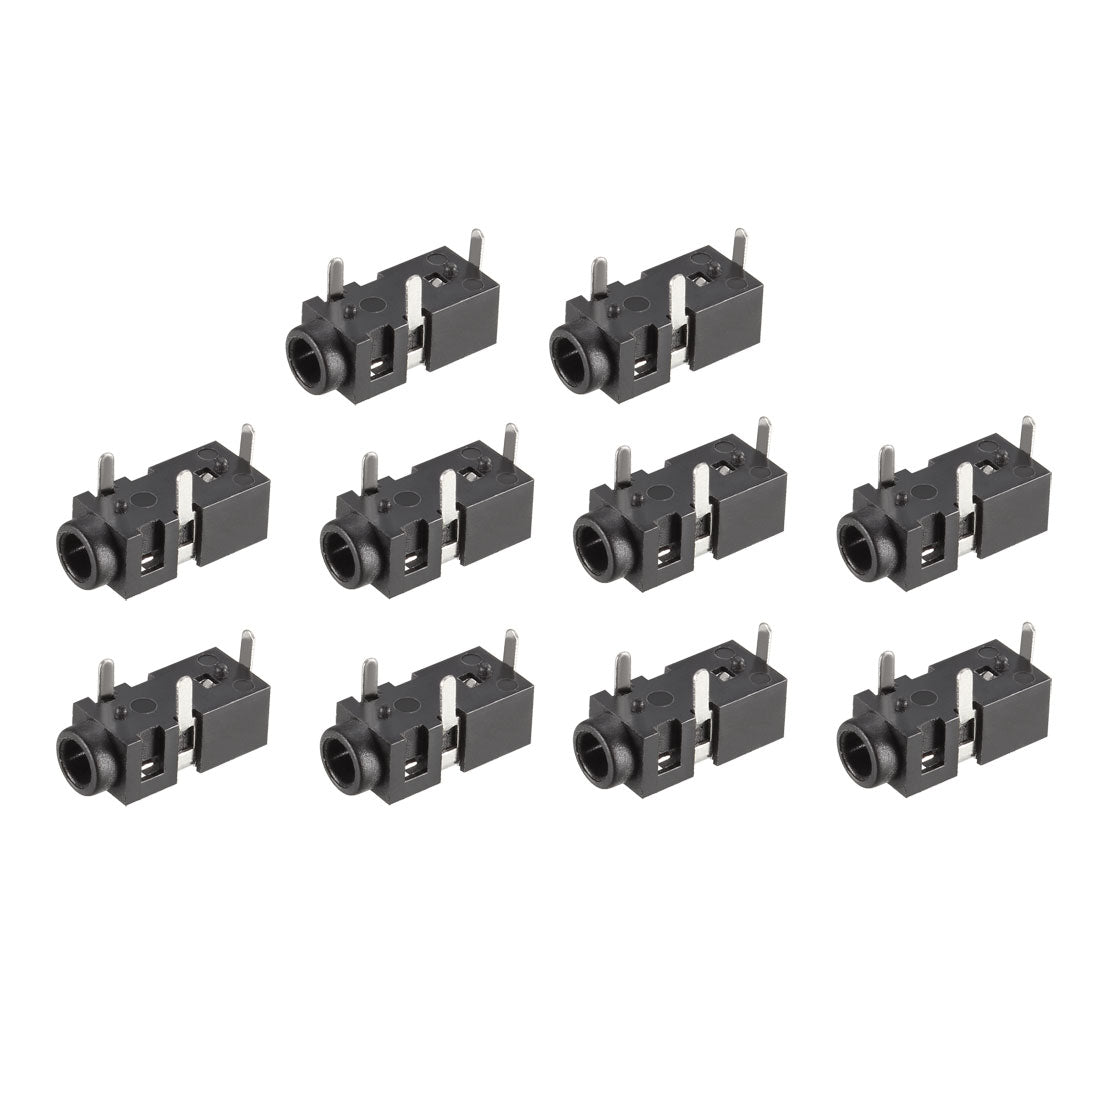 uxcell Uxcell PCB Mount 2.5mm 3 Pin Socket Headphone Stereo Jack Connector PJ208 Black 10Pcs